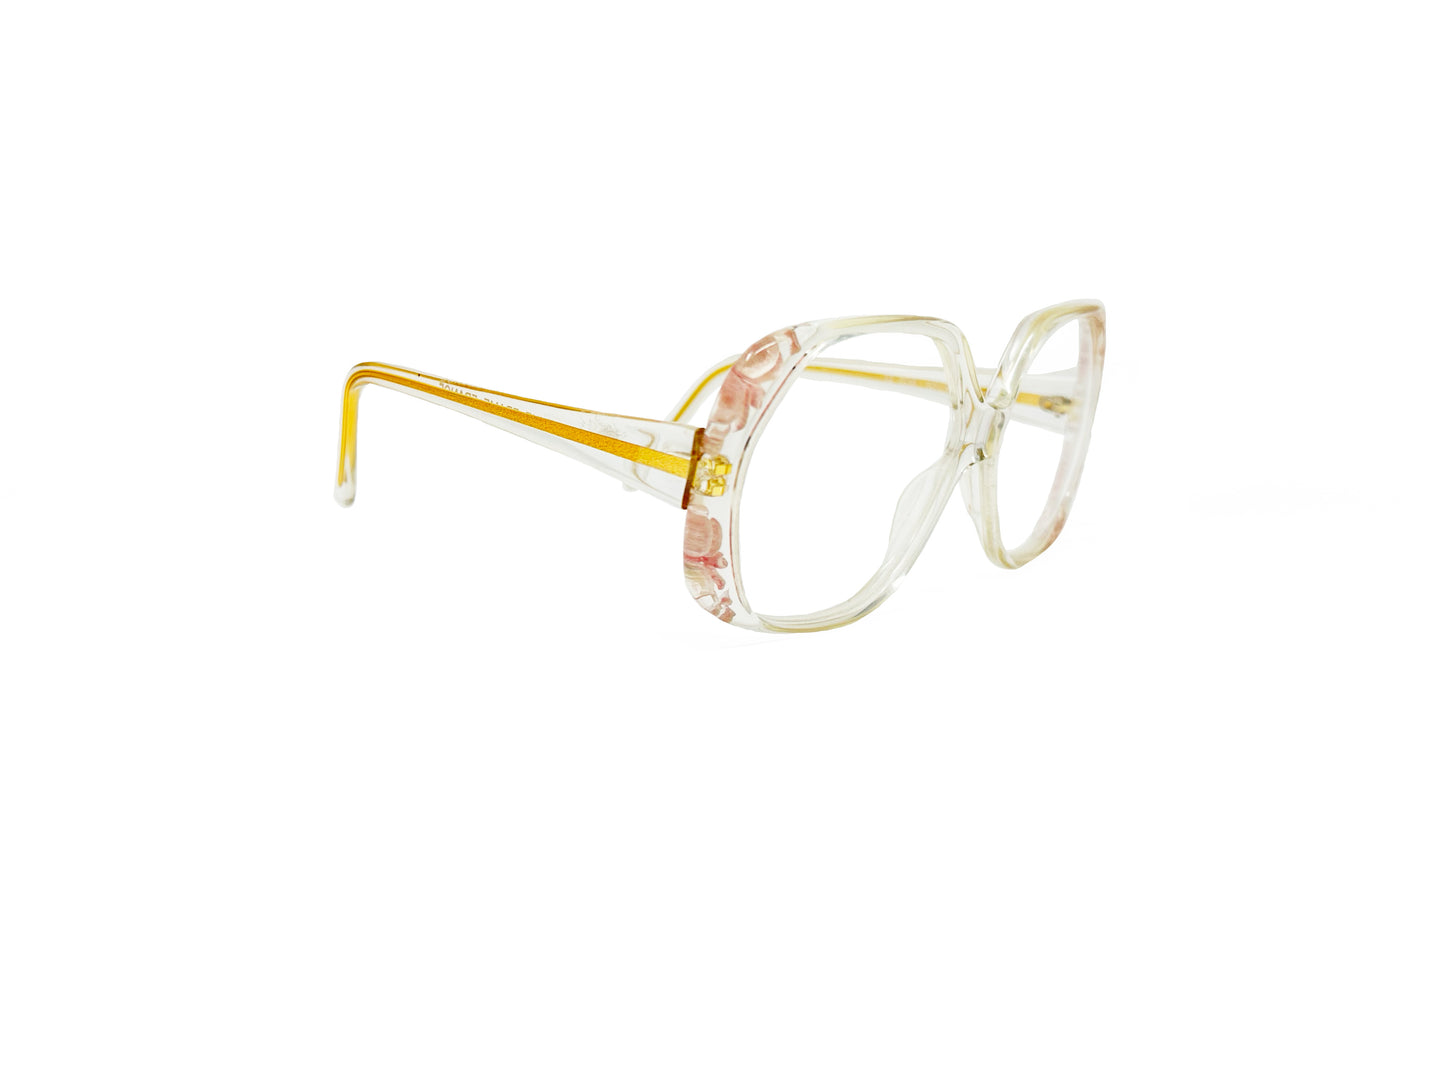 Revue vintage, oversized, acetate optical frame. Model: 606. Color: Pink, clear with pink flower design inlaid inside acetate. Side view.